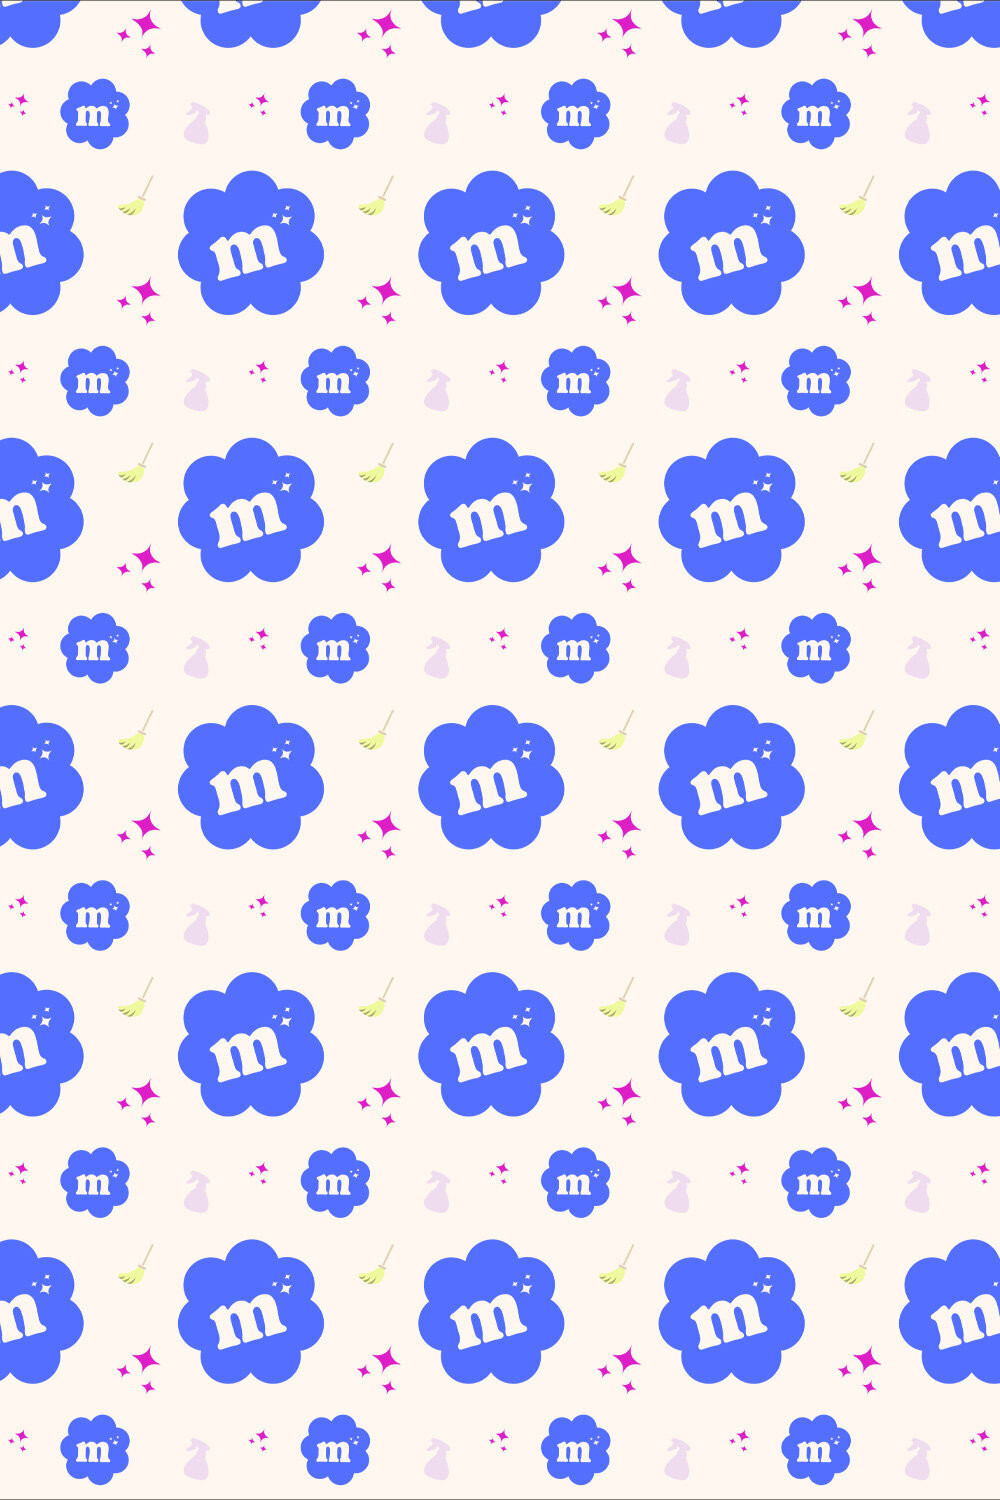 Brand pattern for Meticulous Touch Home Services, designed by Mighty Bean Co.